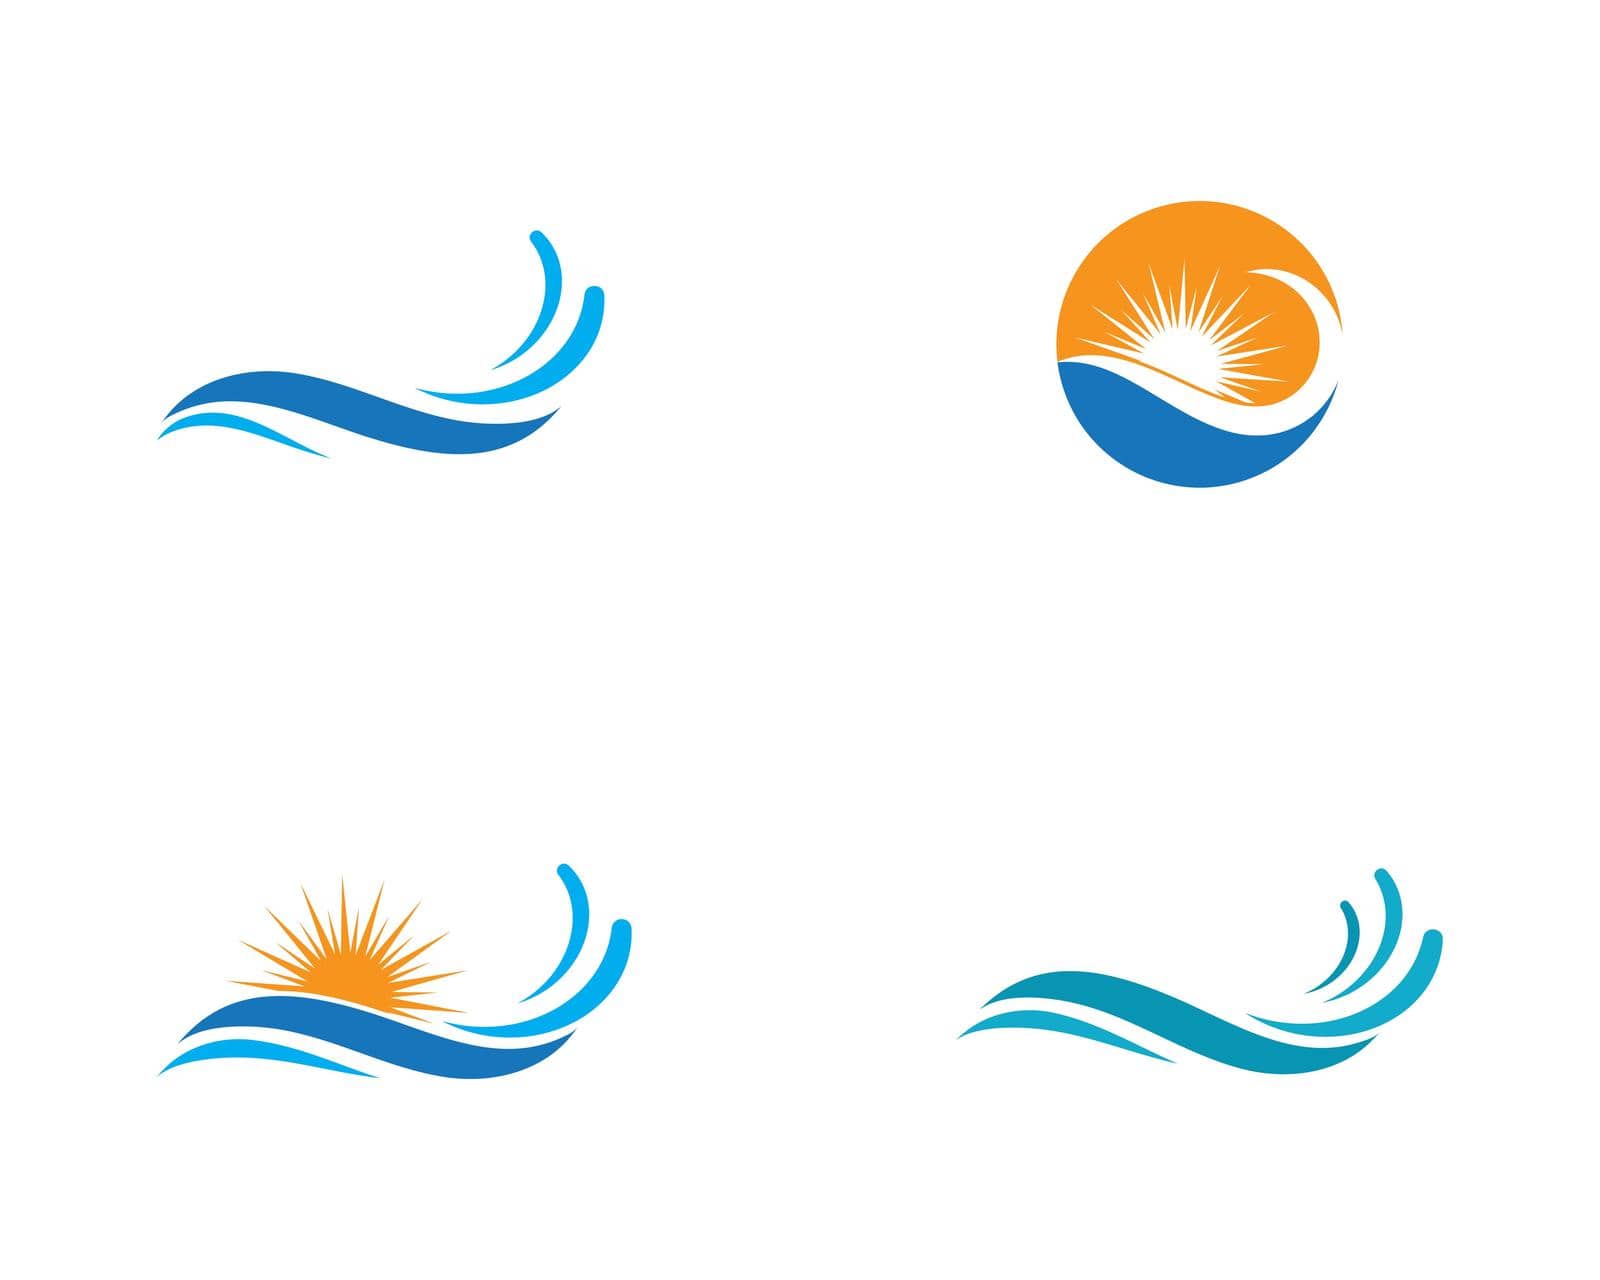 Water Wave symbol and icon Logo Template by awk